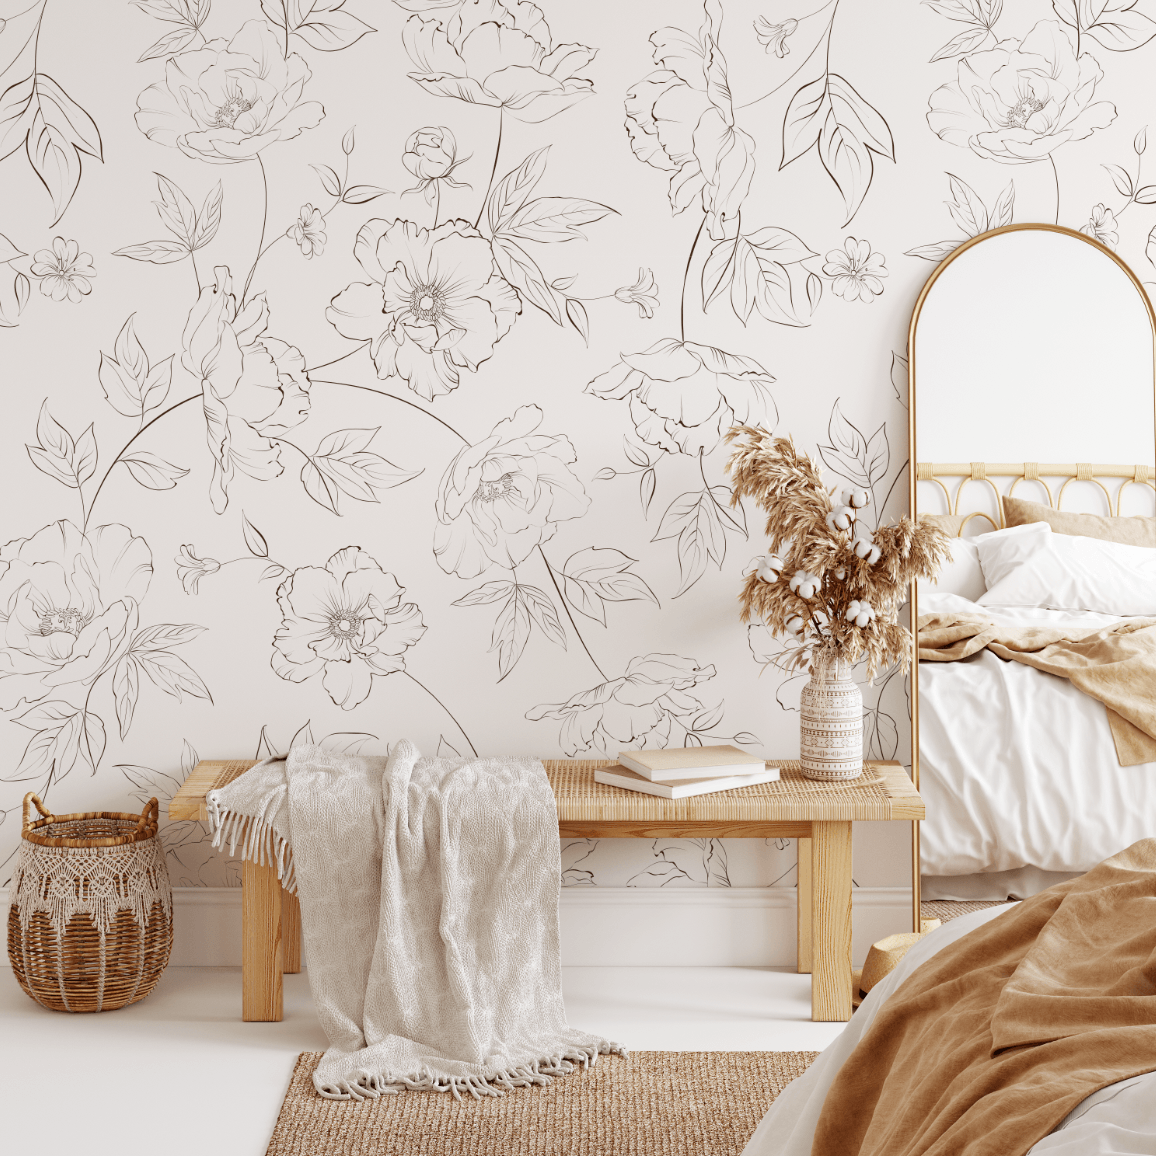 floral removable wallpaper, floral wallpaper, floral removable decals, floral wall decals, floral wall decal, wall murals